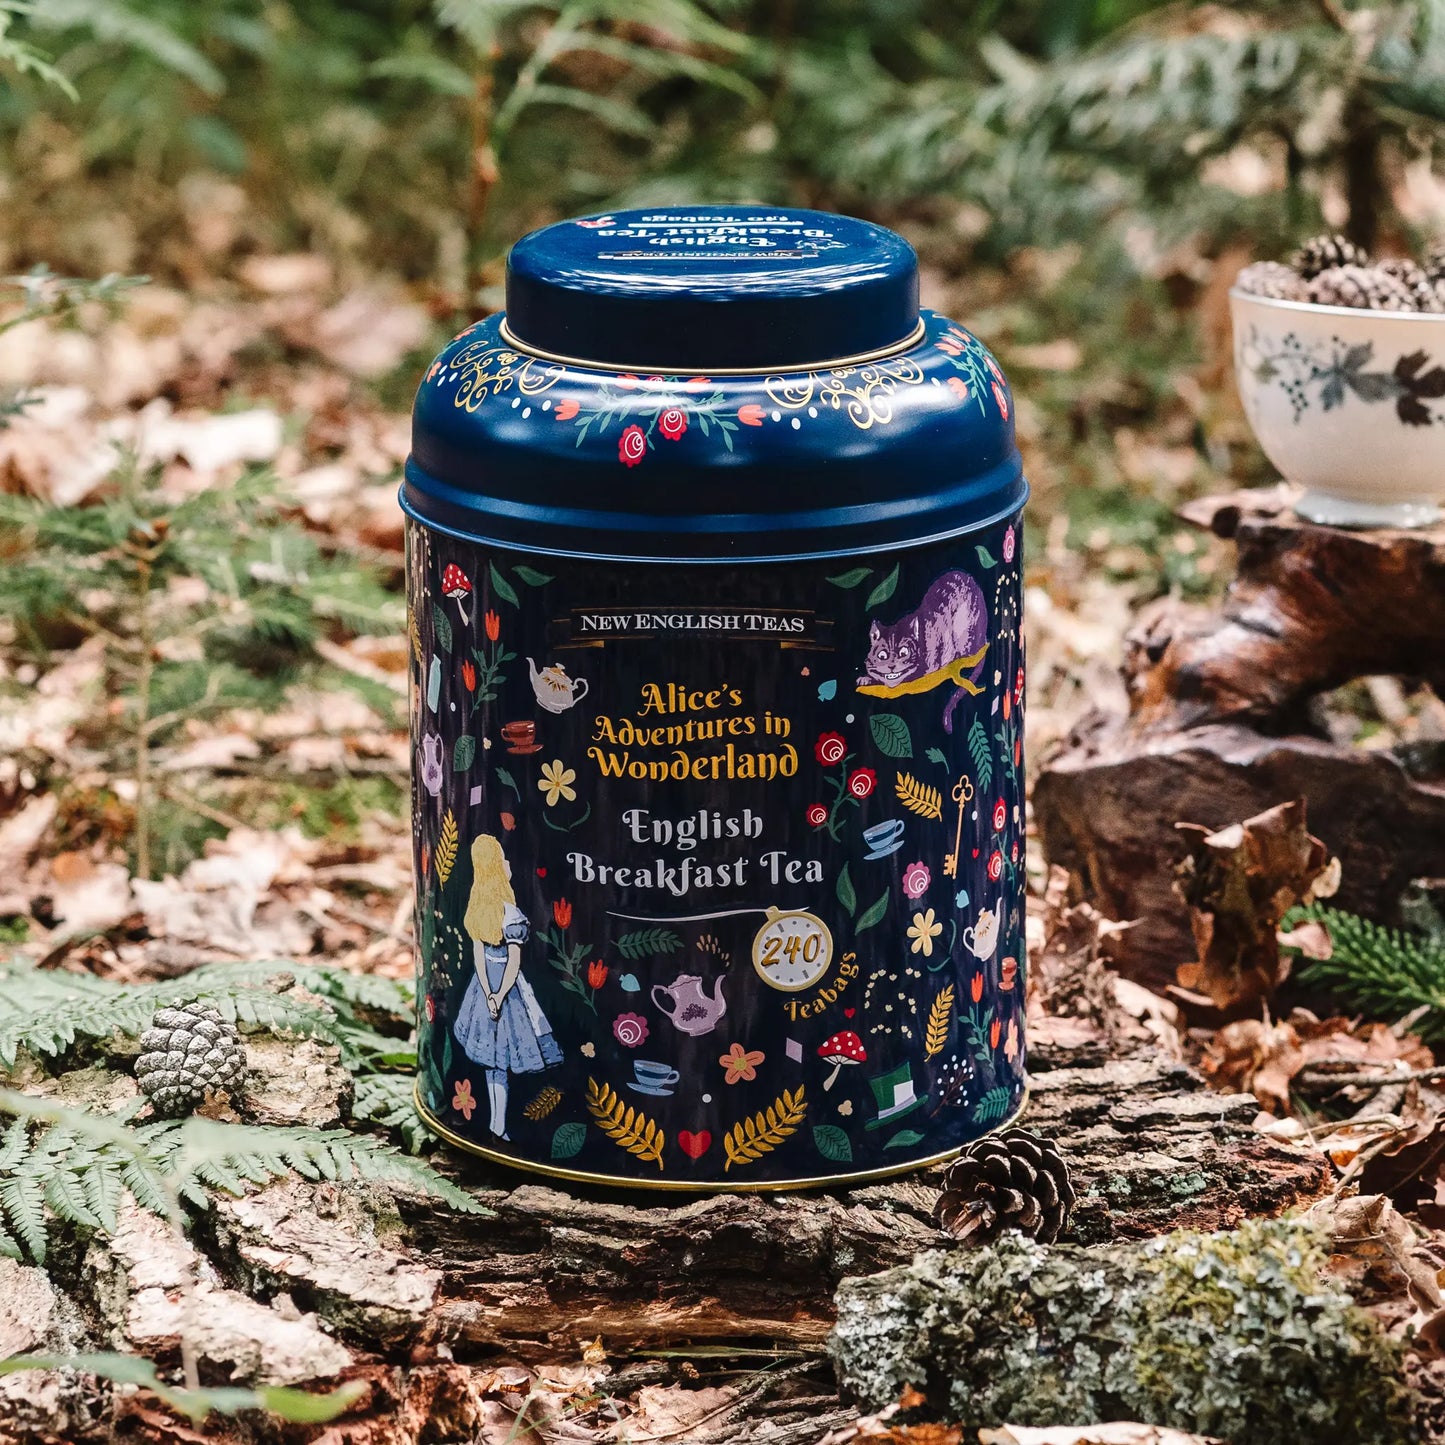 Midnight Alice In Wonderland Tea Caddy With 240 English Breakfast Teabags by New English Teas